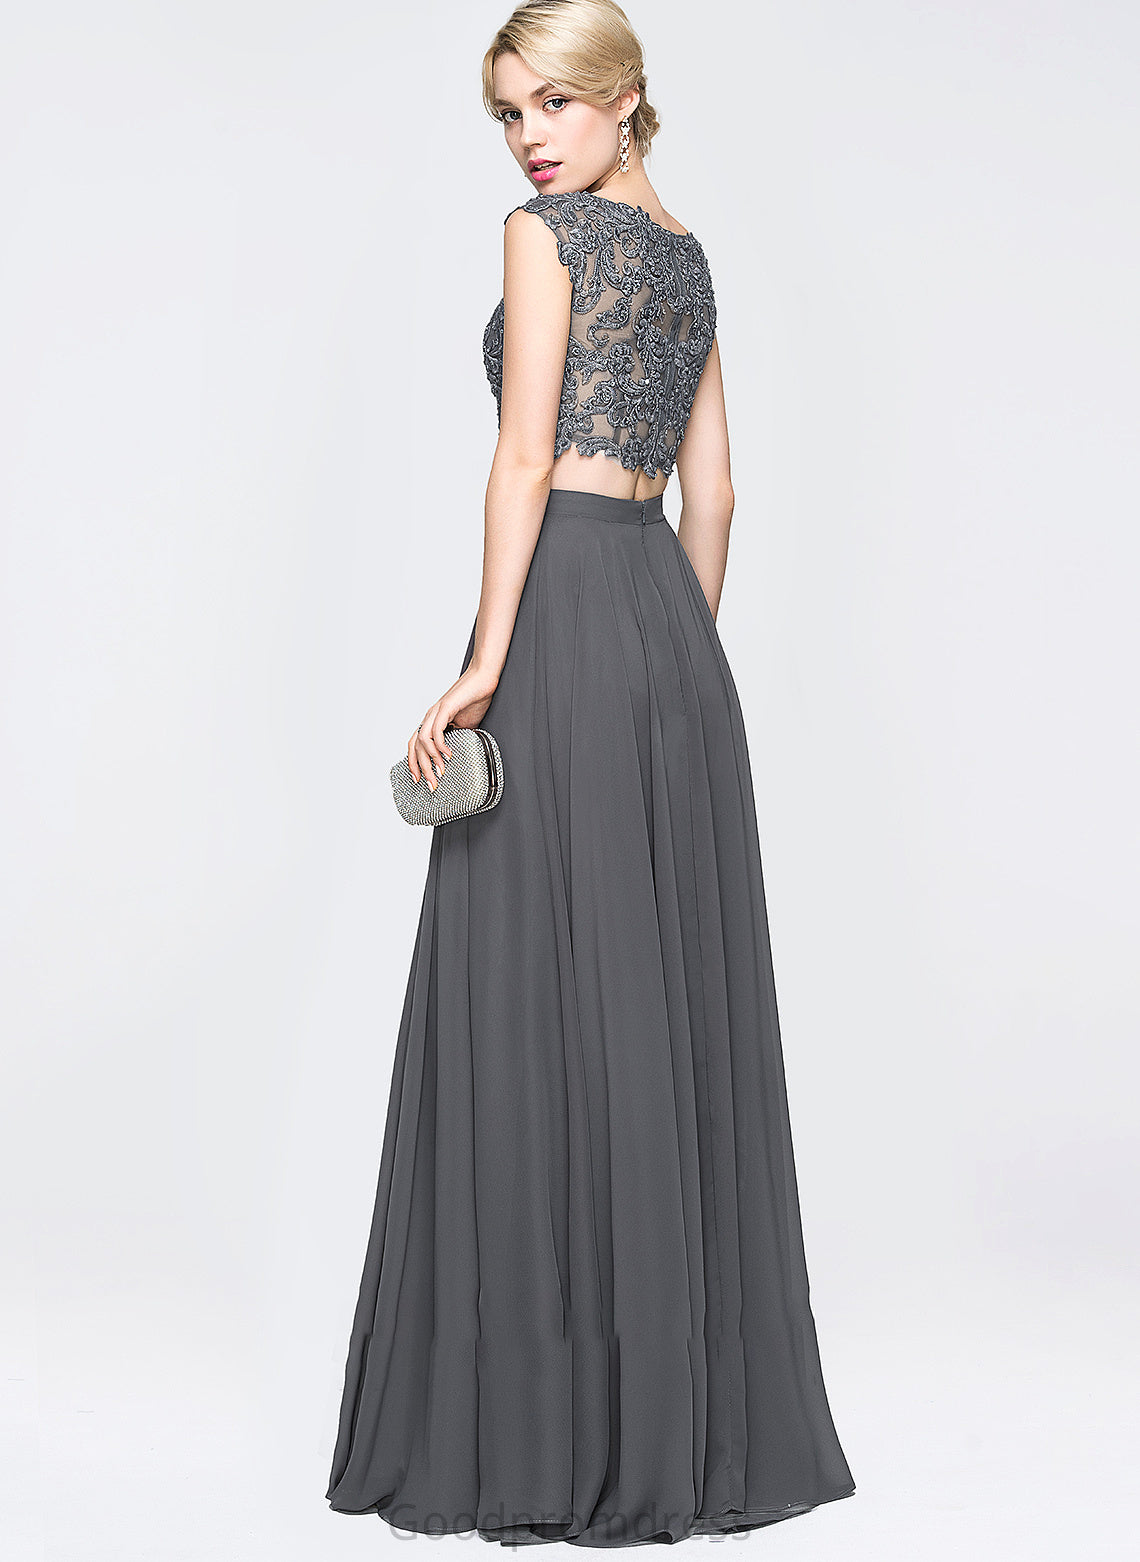 Neck A-Line Scoop Beading Sequins With Jewel Chiffon Prom Dresses Floor-Length